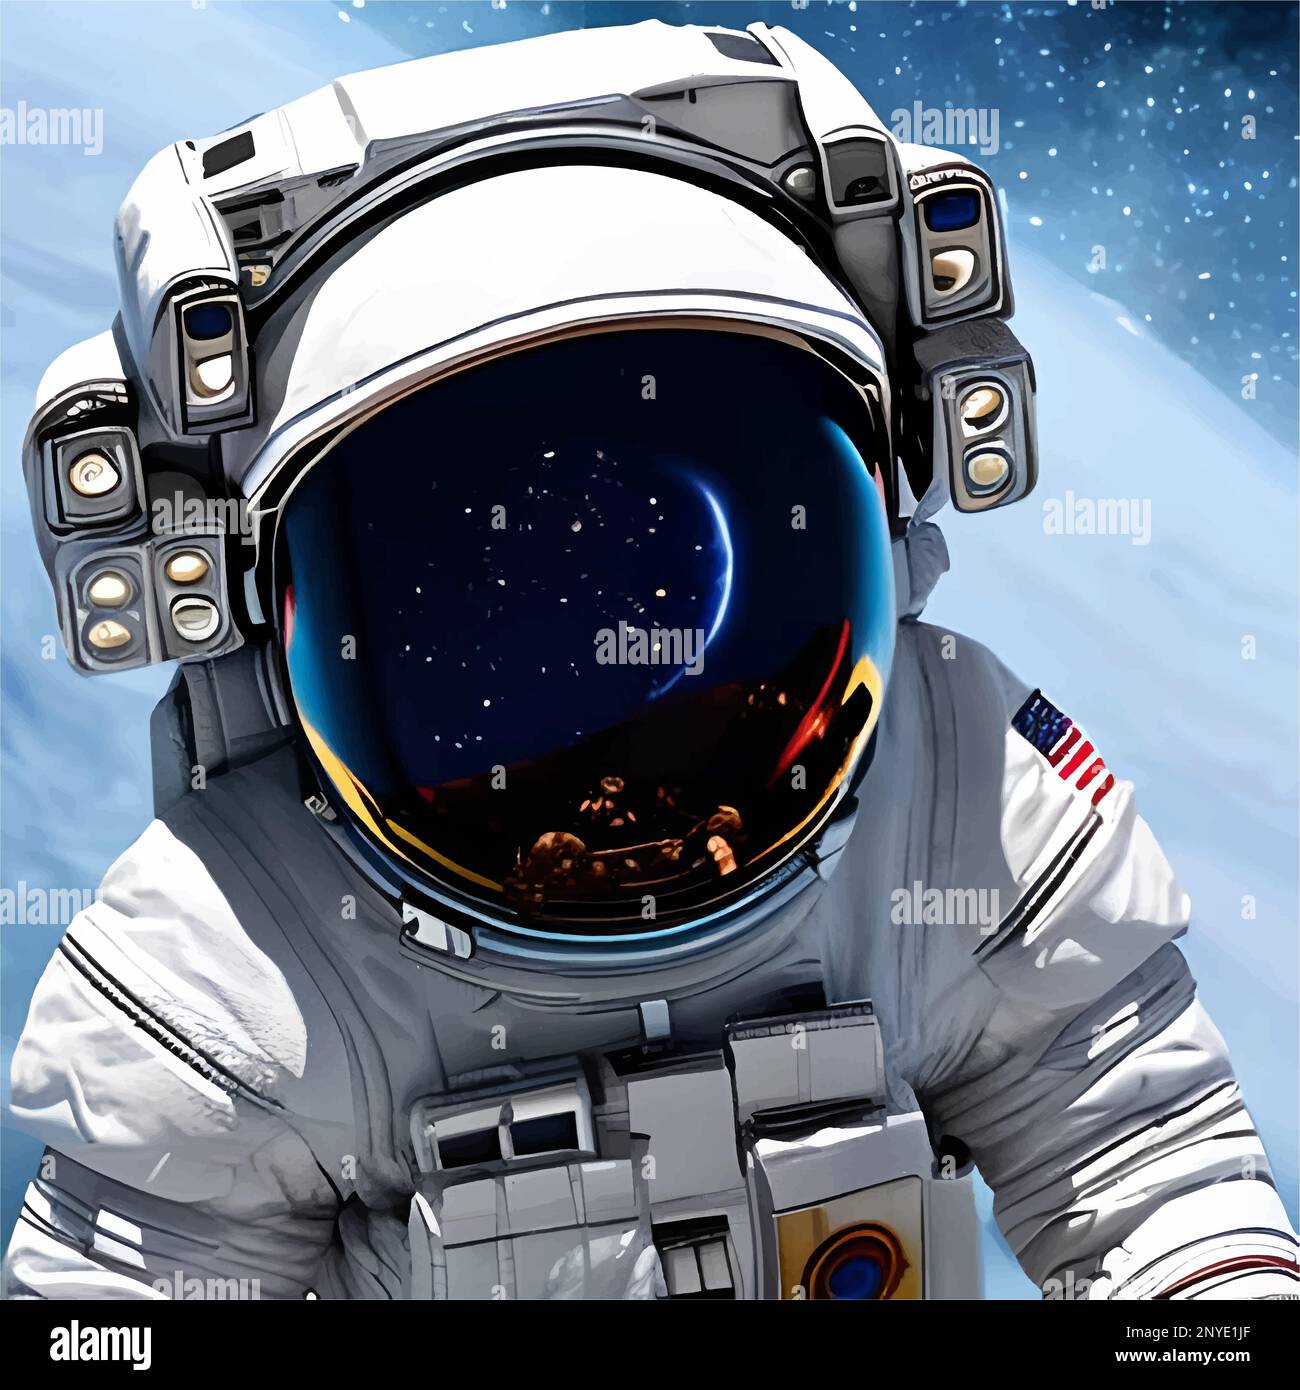 American astronaut figure in the open space vector illustration. Space helmet with the reflection Stock Vector